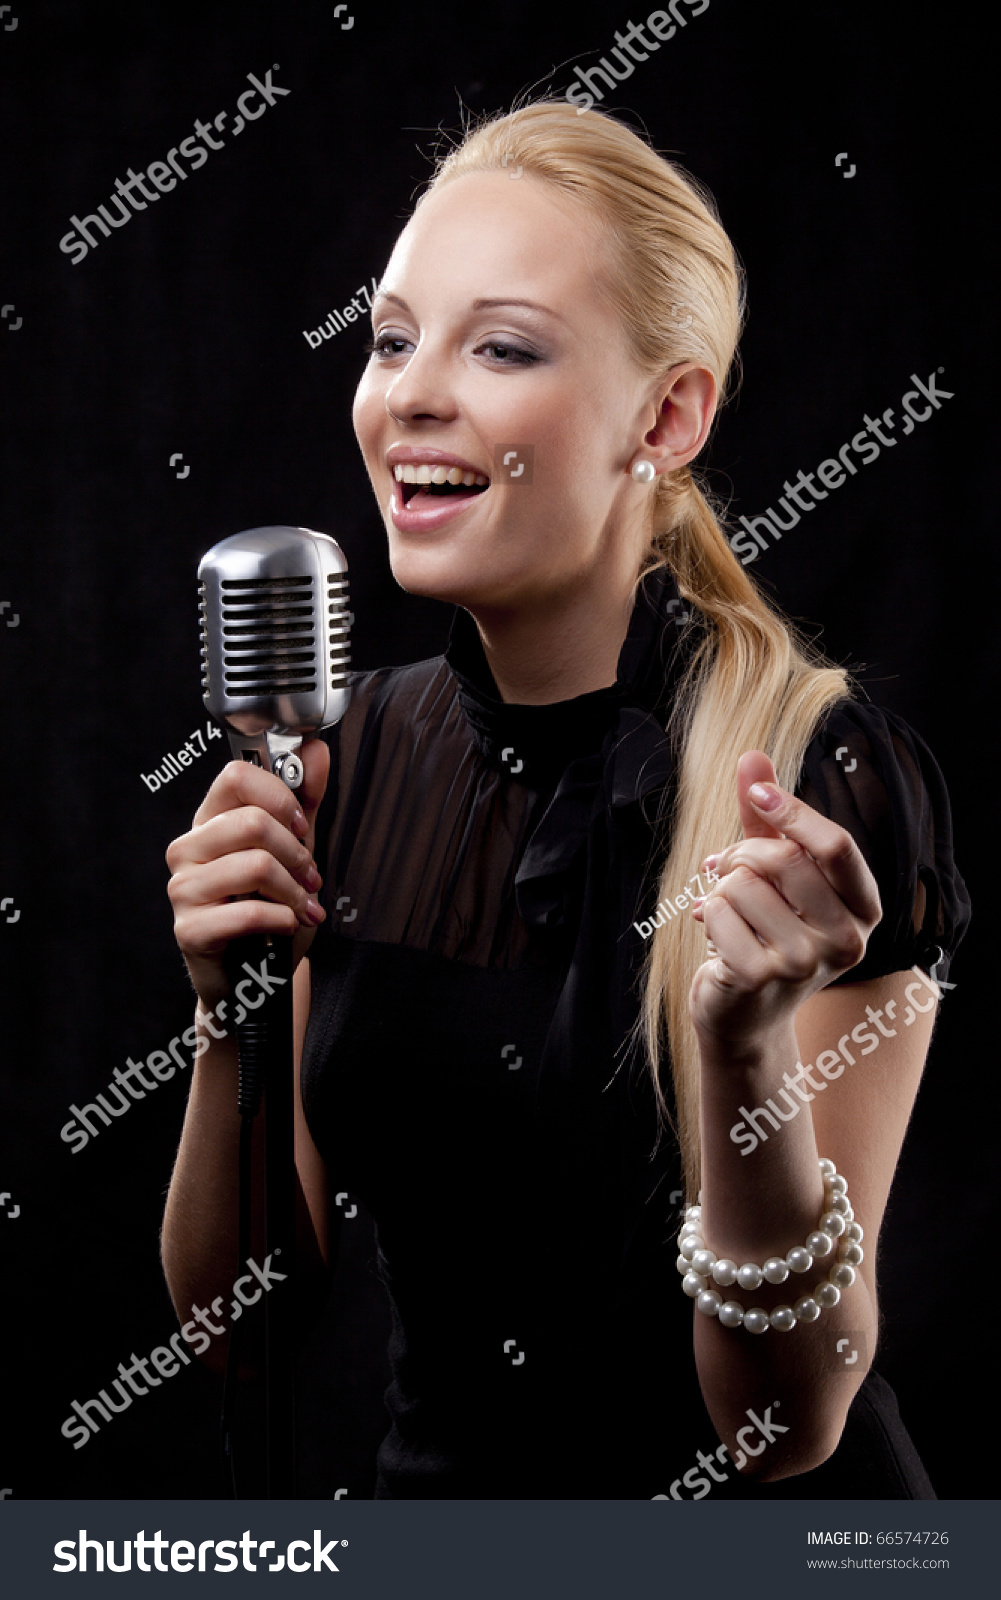 An elegant female singer with microphone #66574726